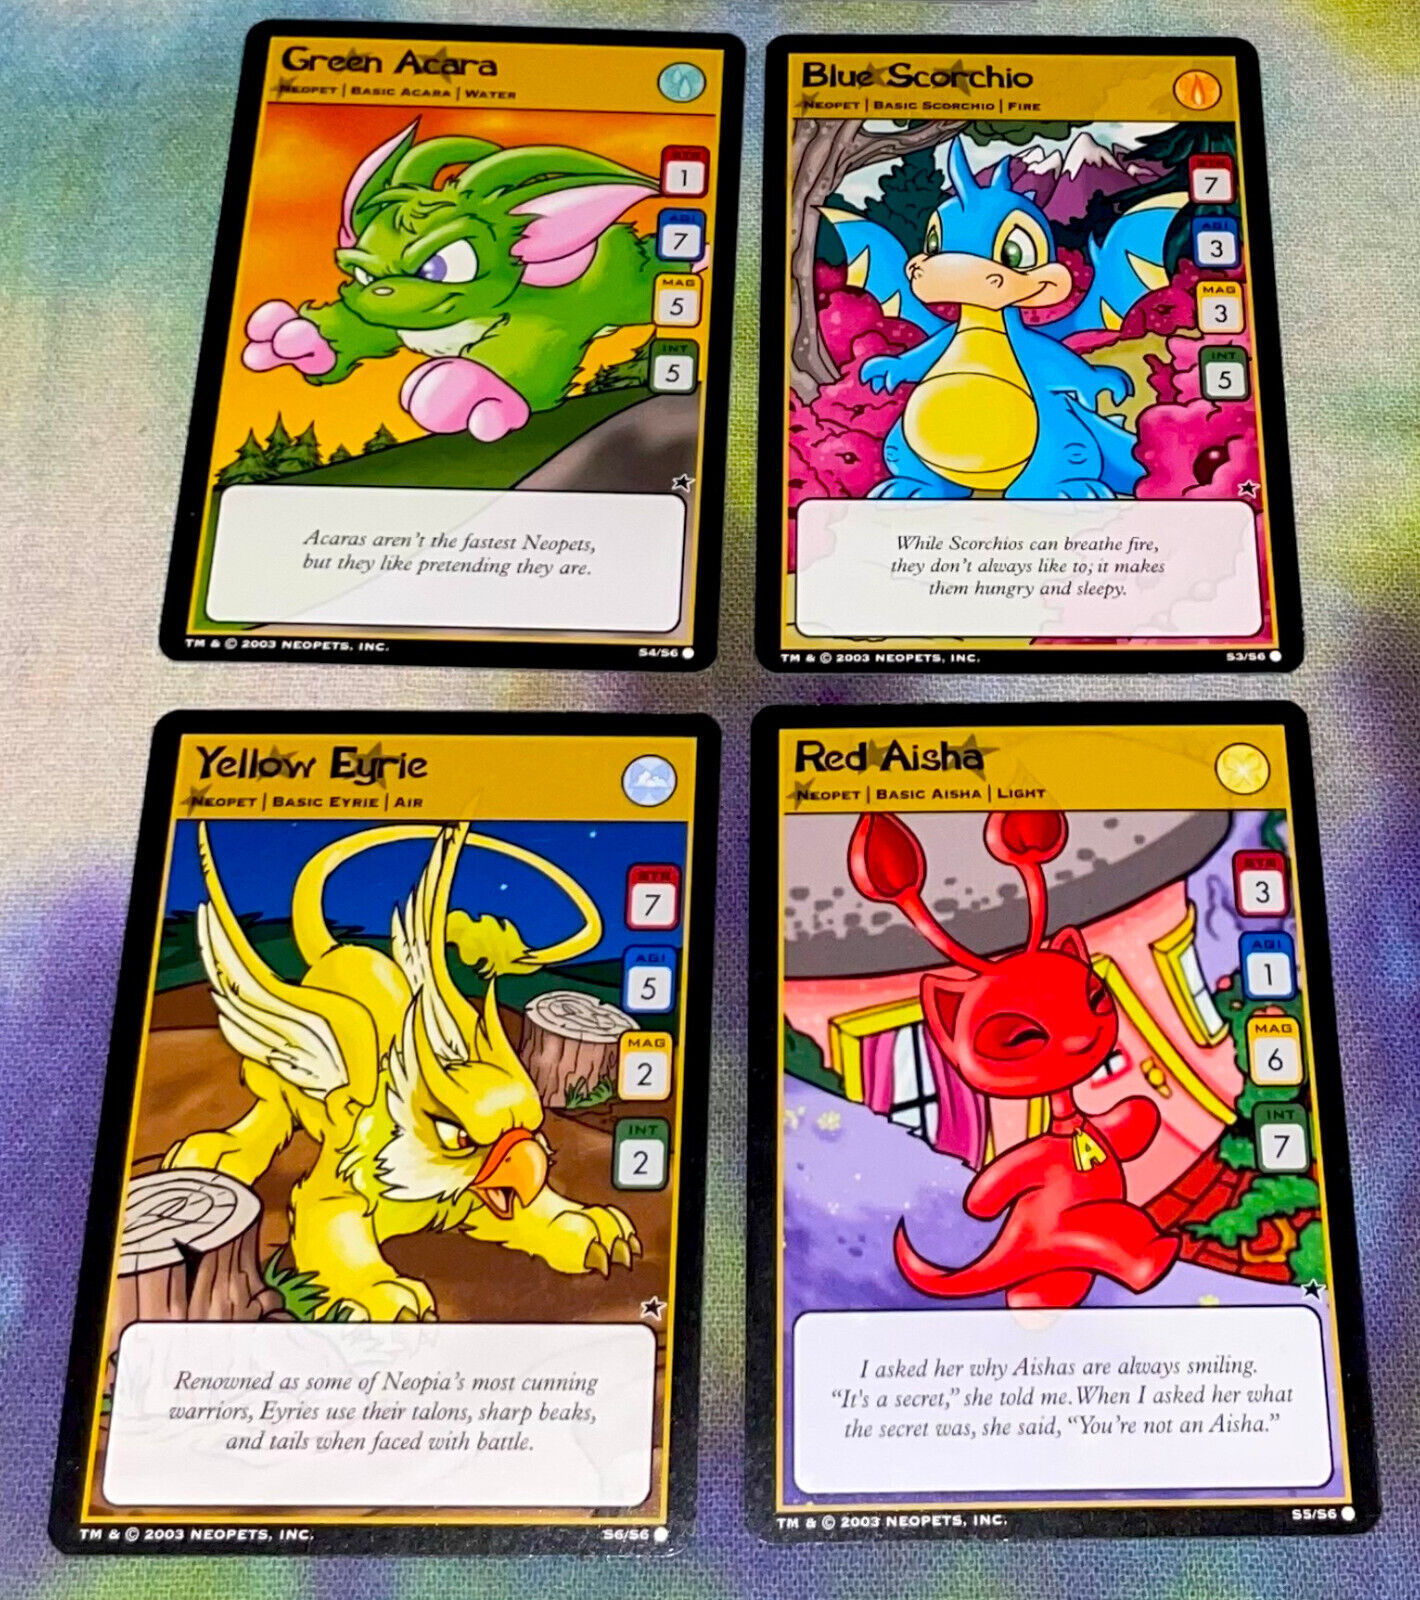 NEOPETS 2003 TCG S3 Blue Scorchio, S4 Green Acara, S5 Red Aisha, S6 Yellow Eyrie